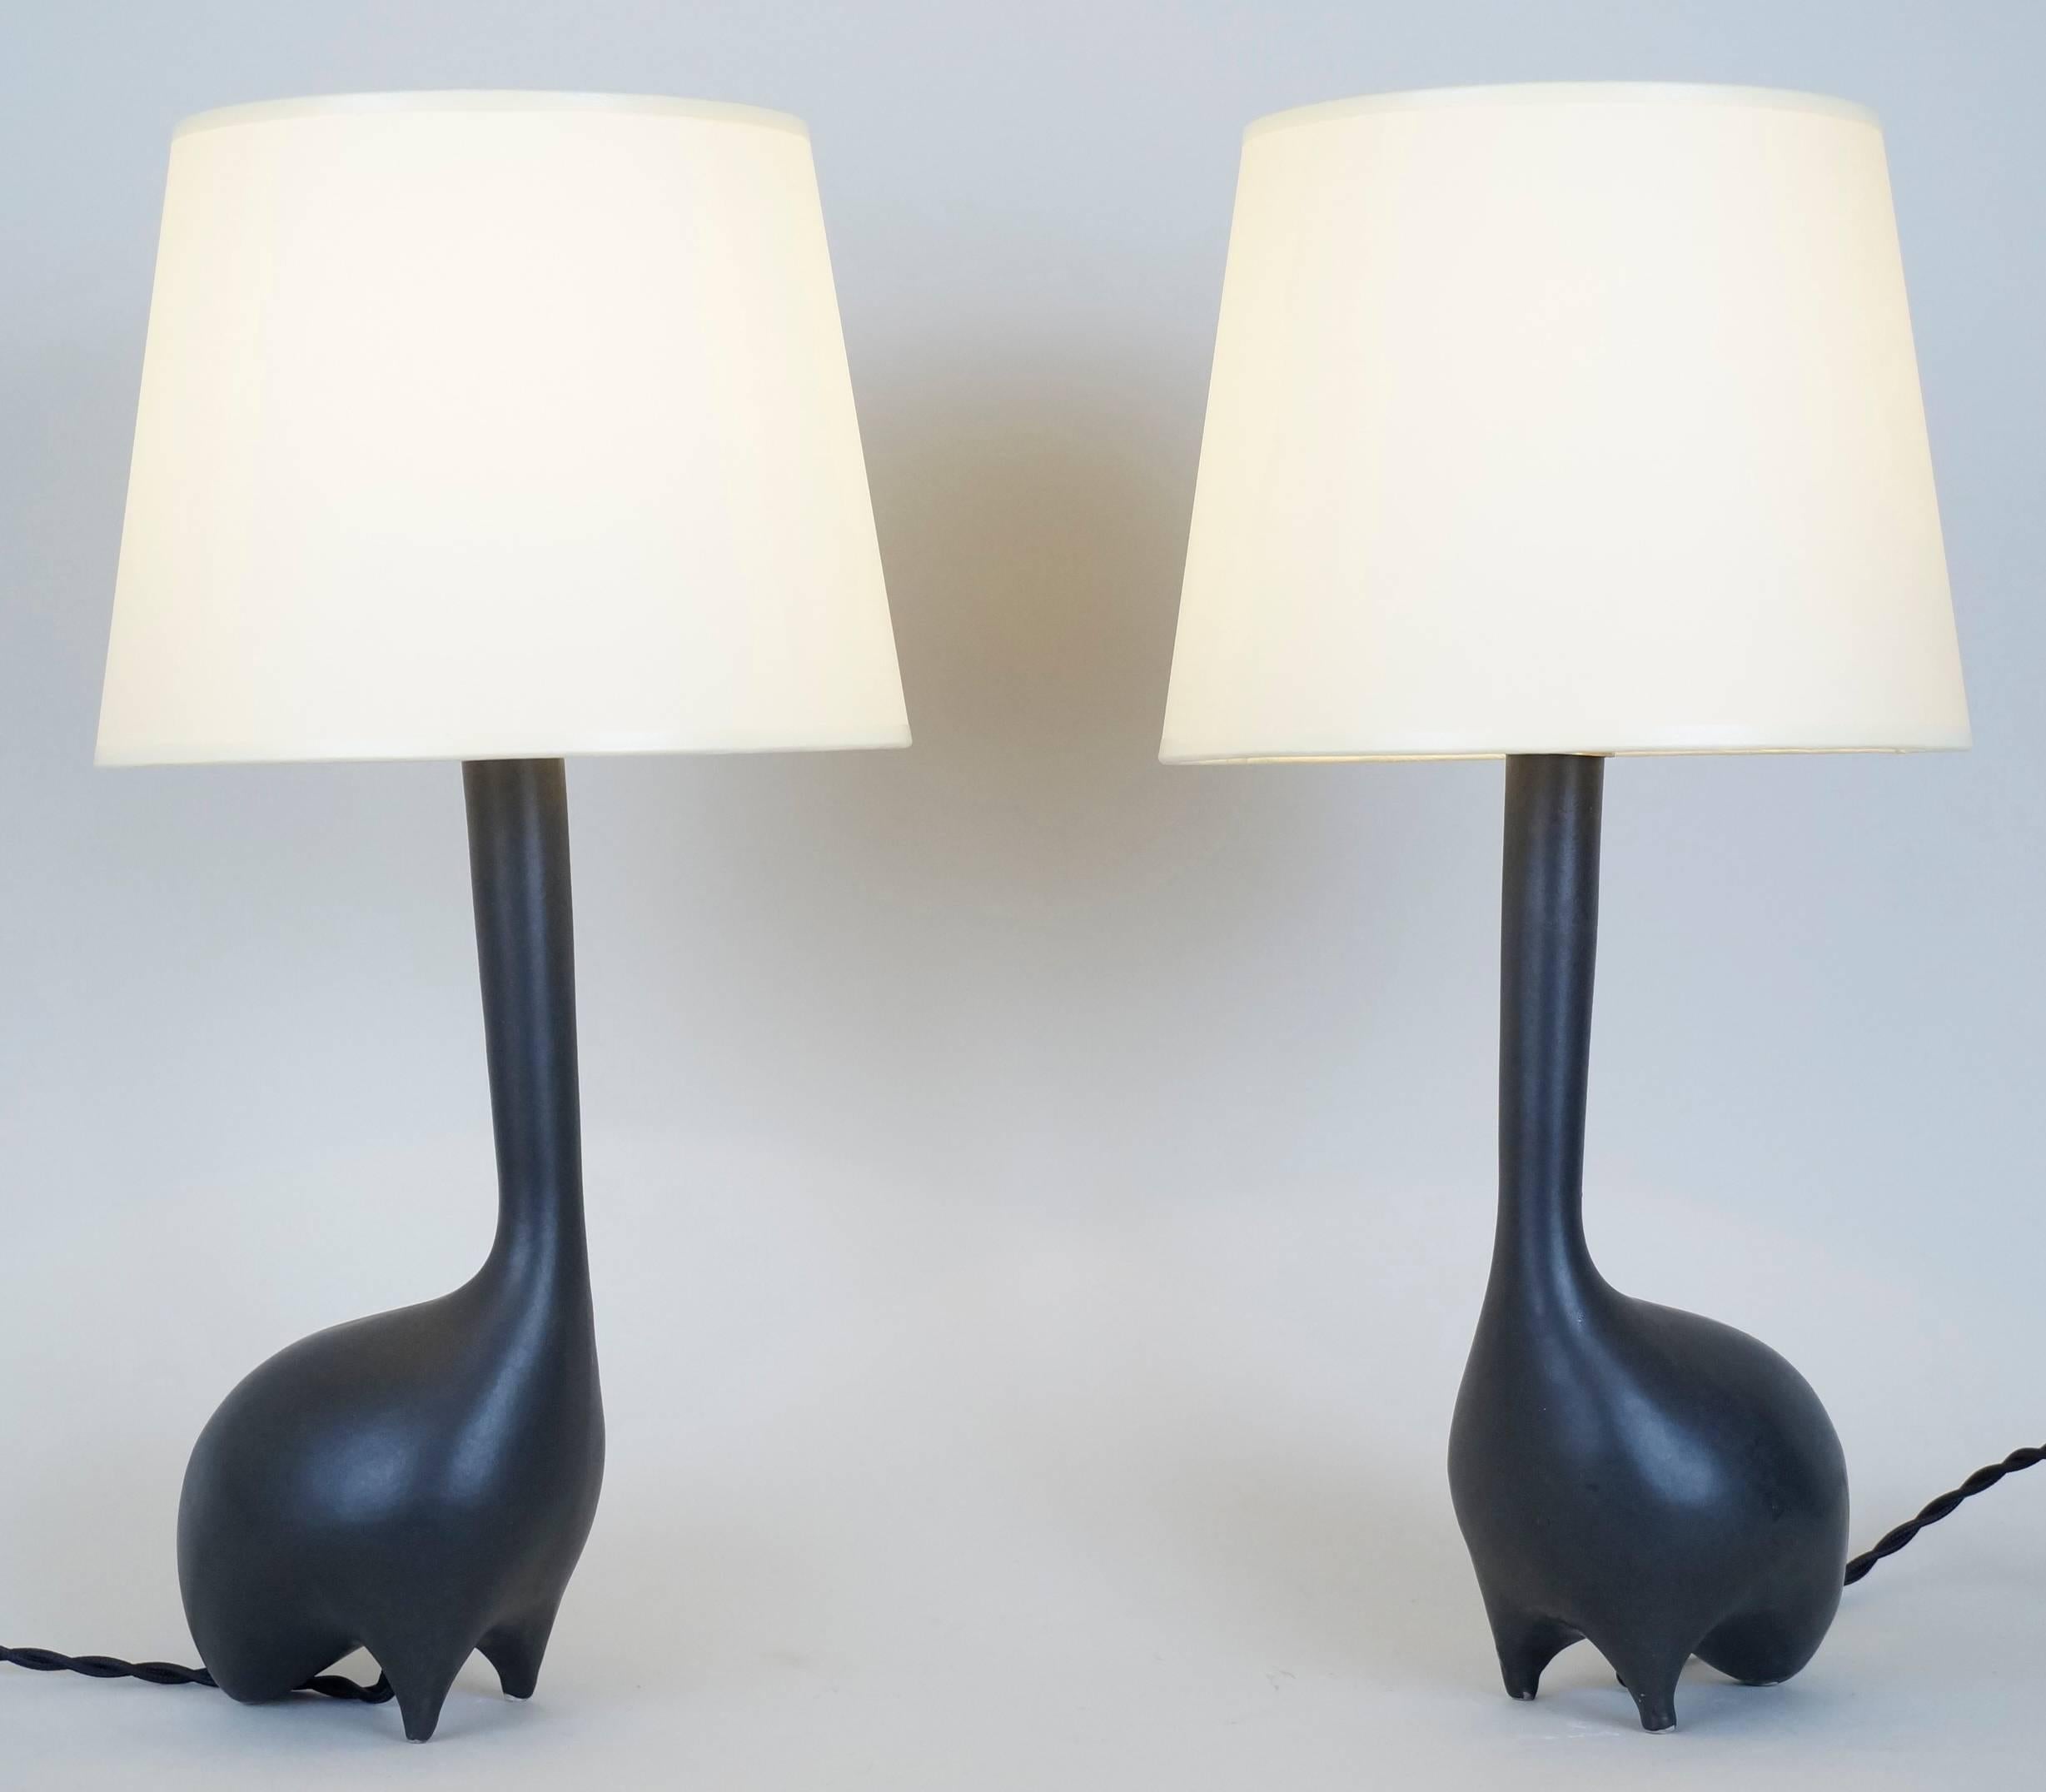 Pair of bird shape black ceramic table lamps, custom-made fabric lampshade, rewired with twisted silk cord.
US standard plug on request.
Ceramic body height: 23 cm – 9.1 in.
Height with lampshade: 36 cm – 14.2 in.